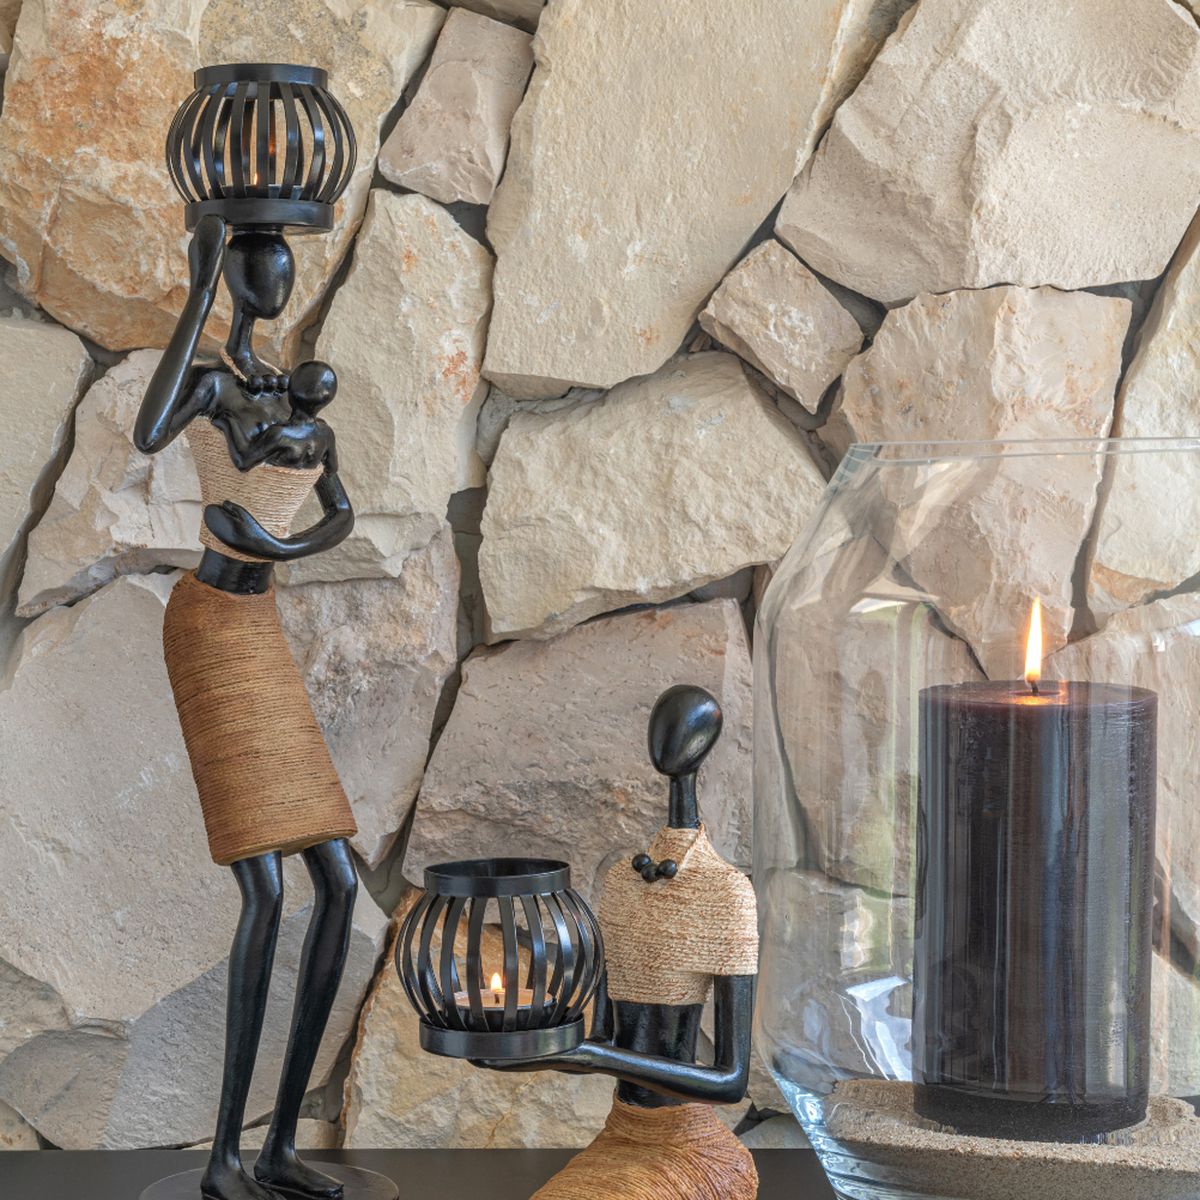 Set of 2 African figurine candle holders